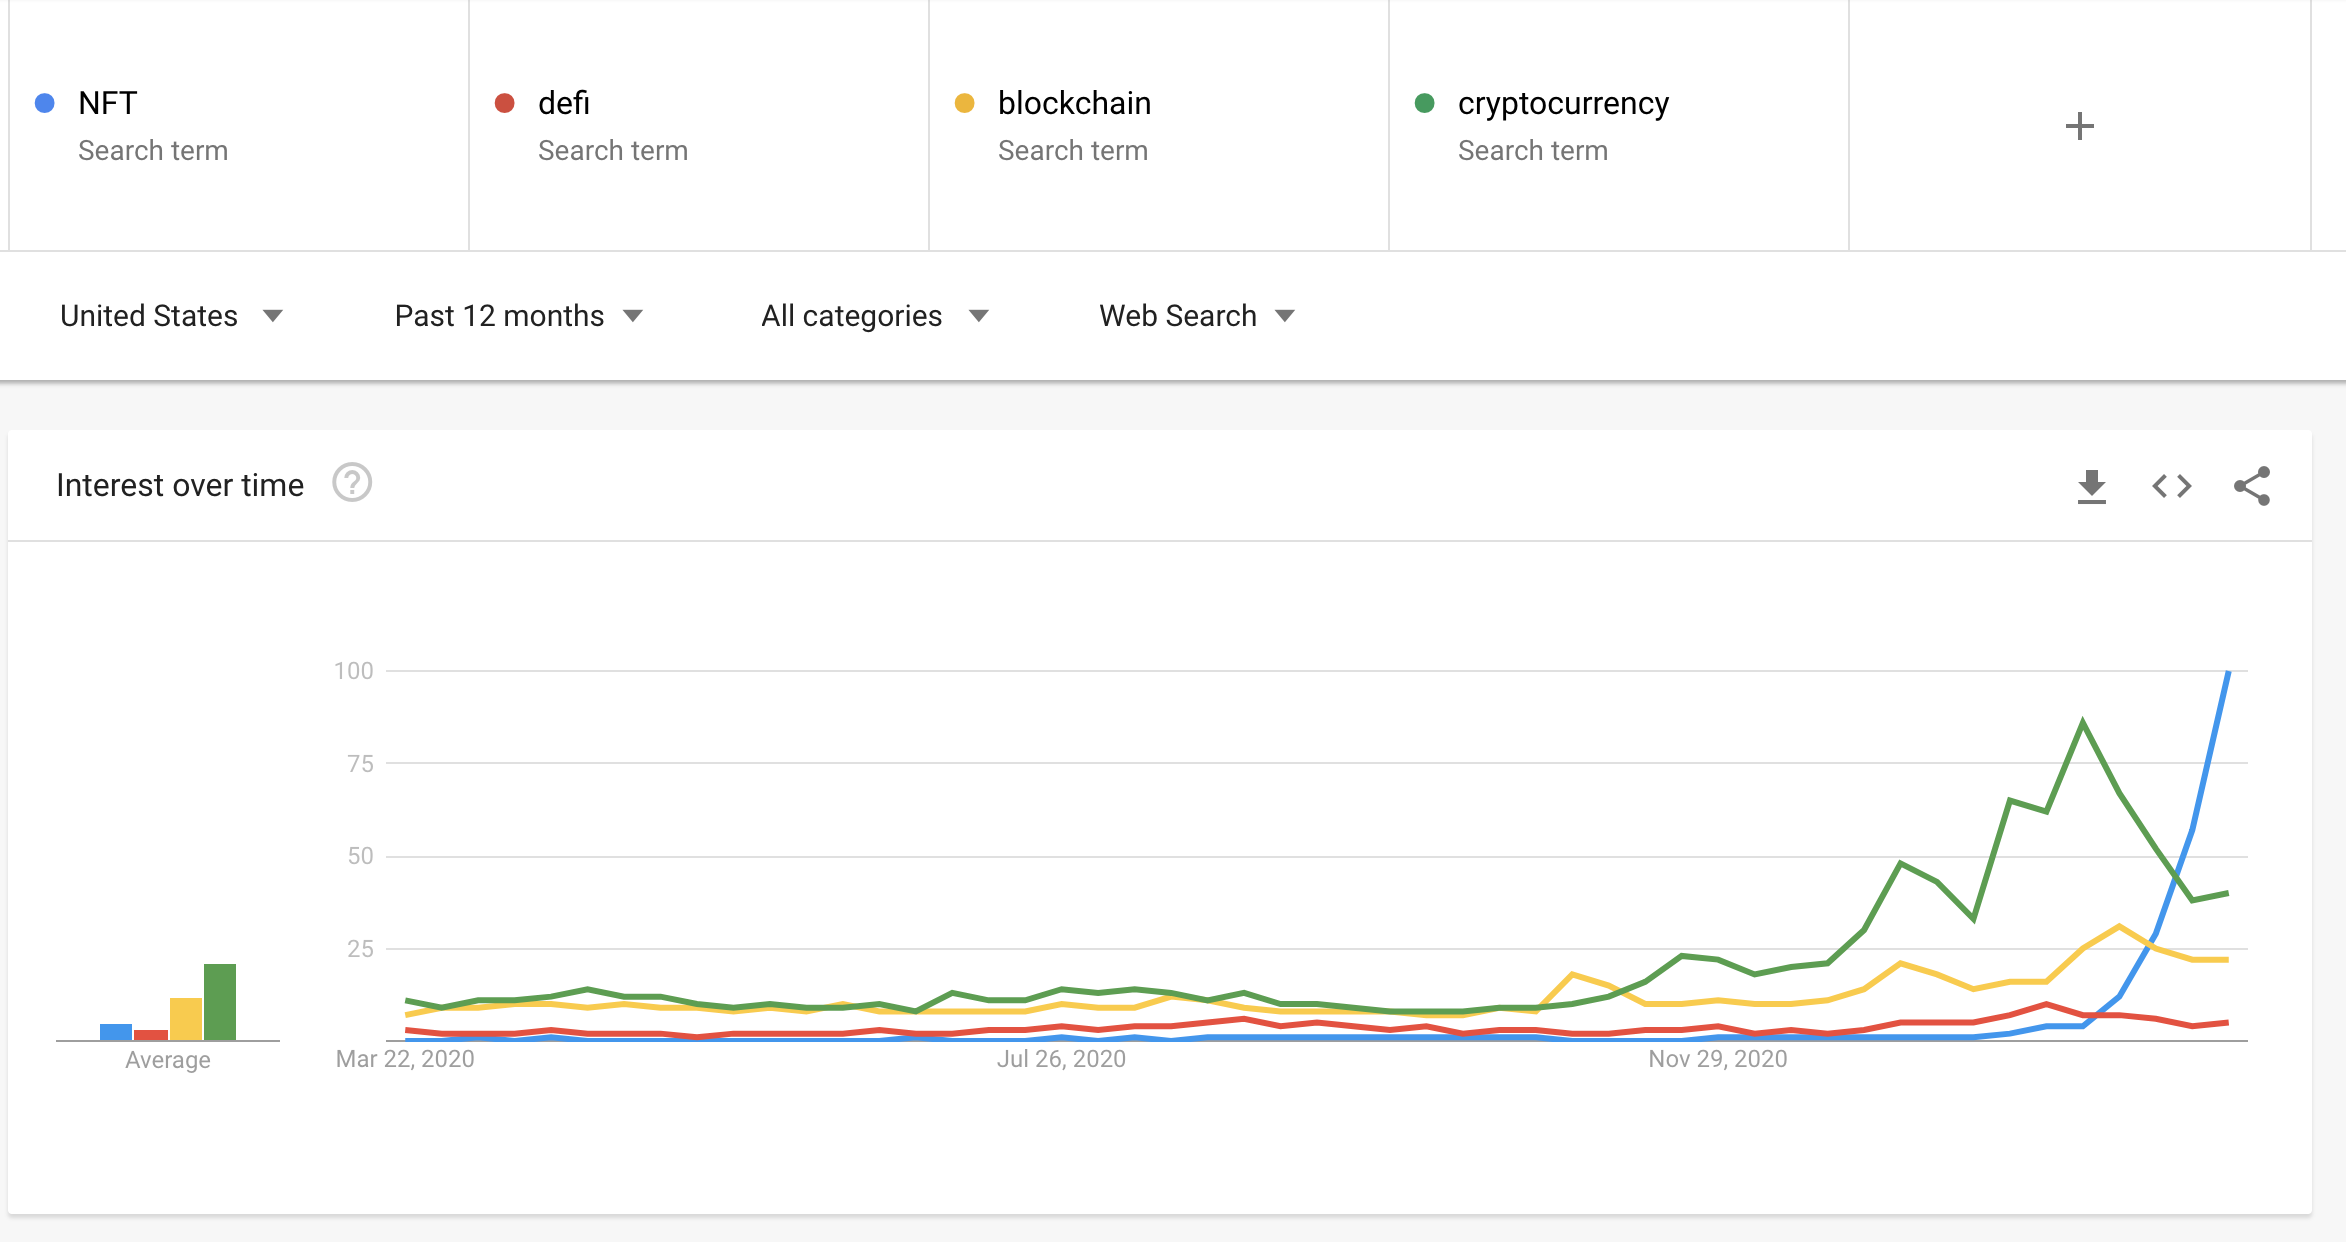 ‘NFT’ Google Searches Overtakes ‘Cryptocurrency’ and ‘Blockchain’